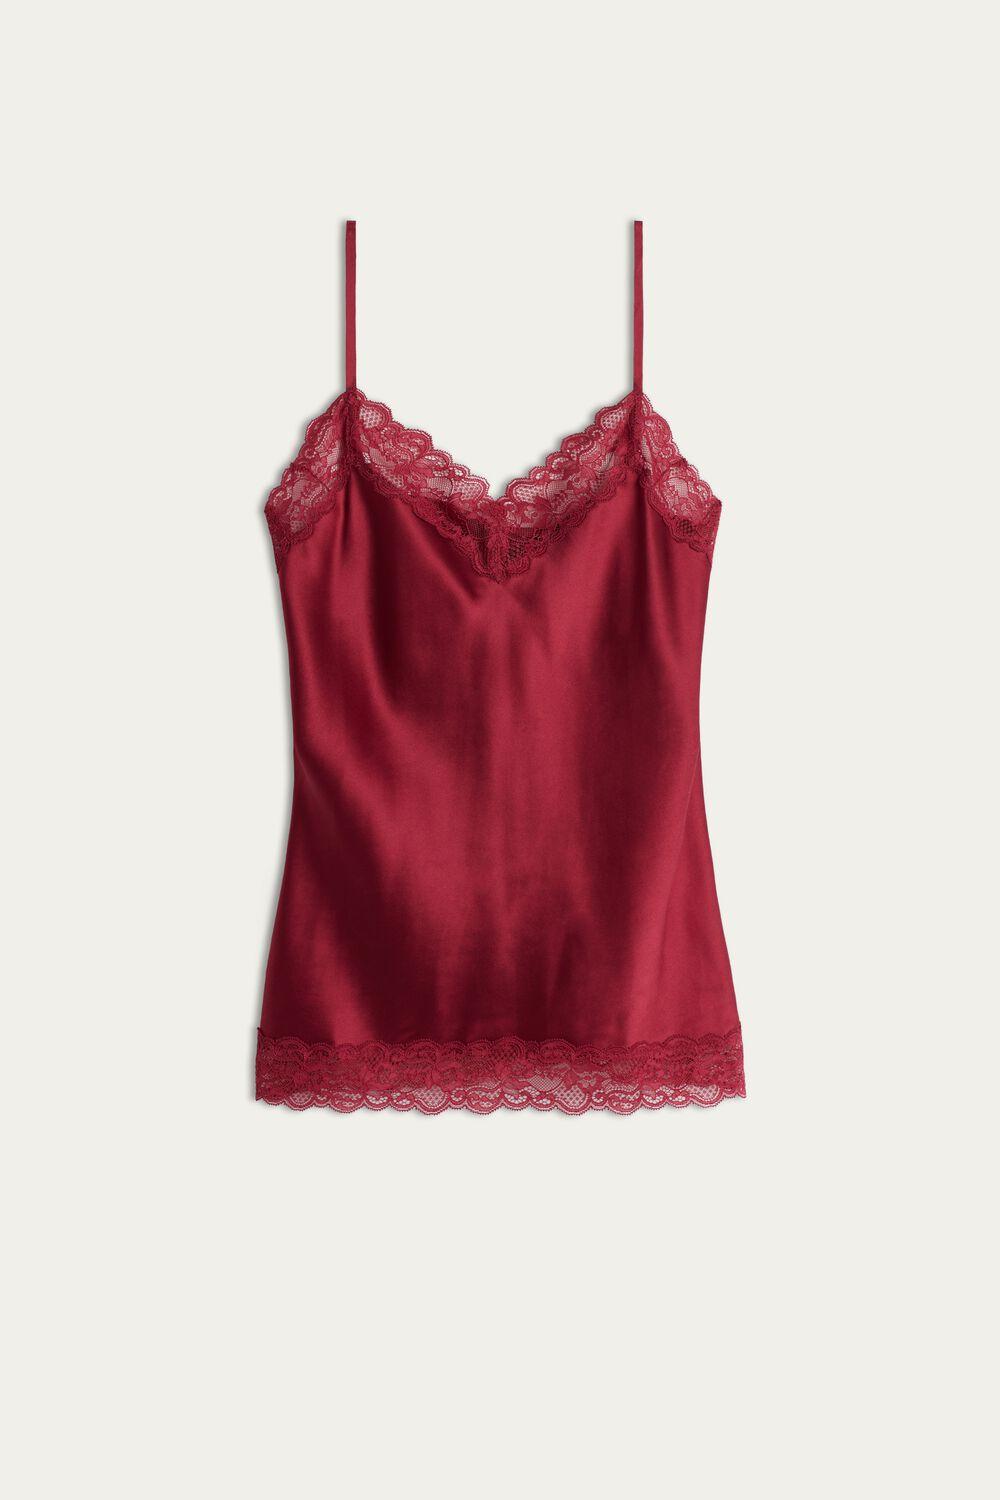 Intimissimi Lace And Silk Top in Cherry Red (Red) - Lyst